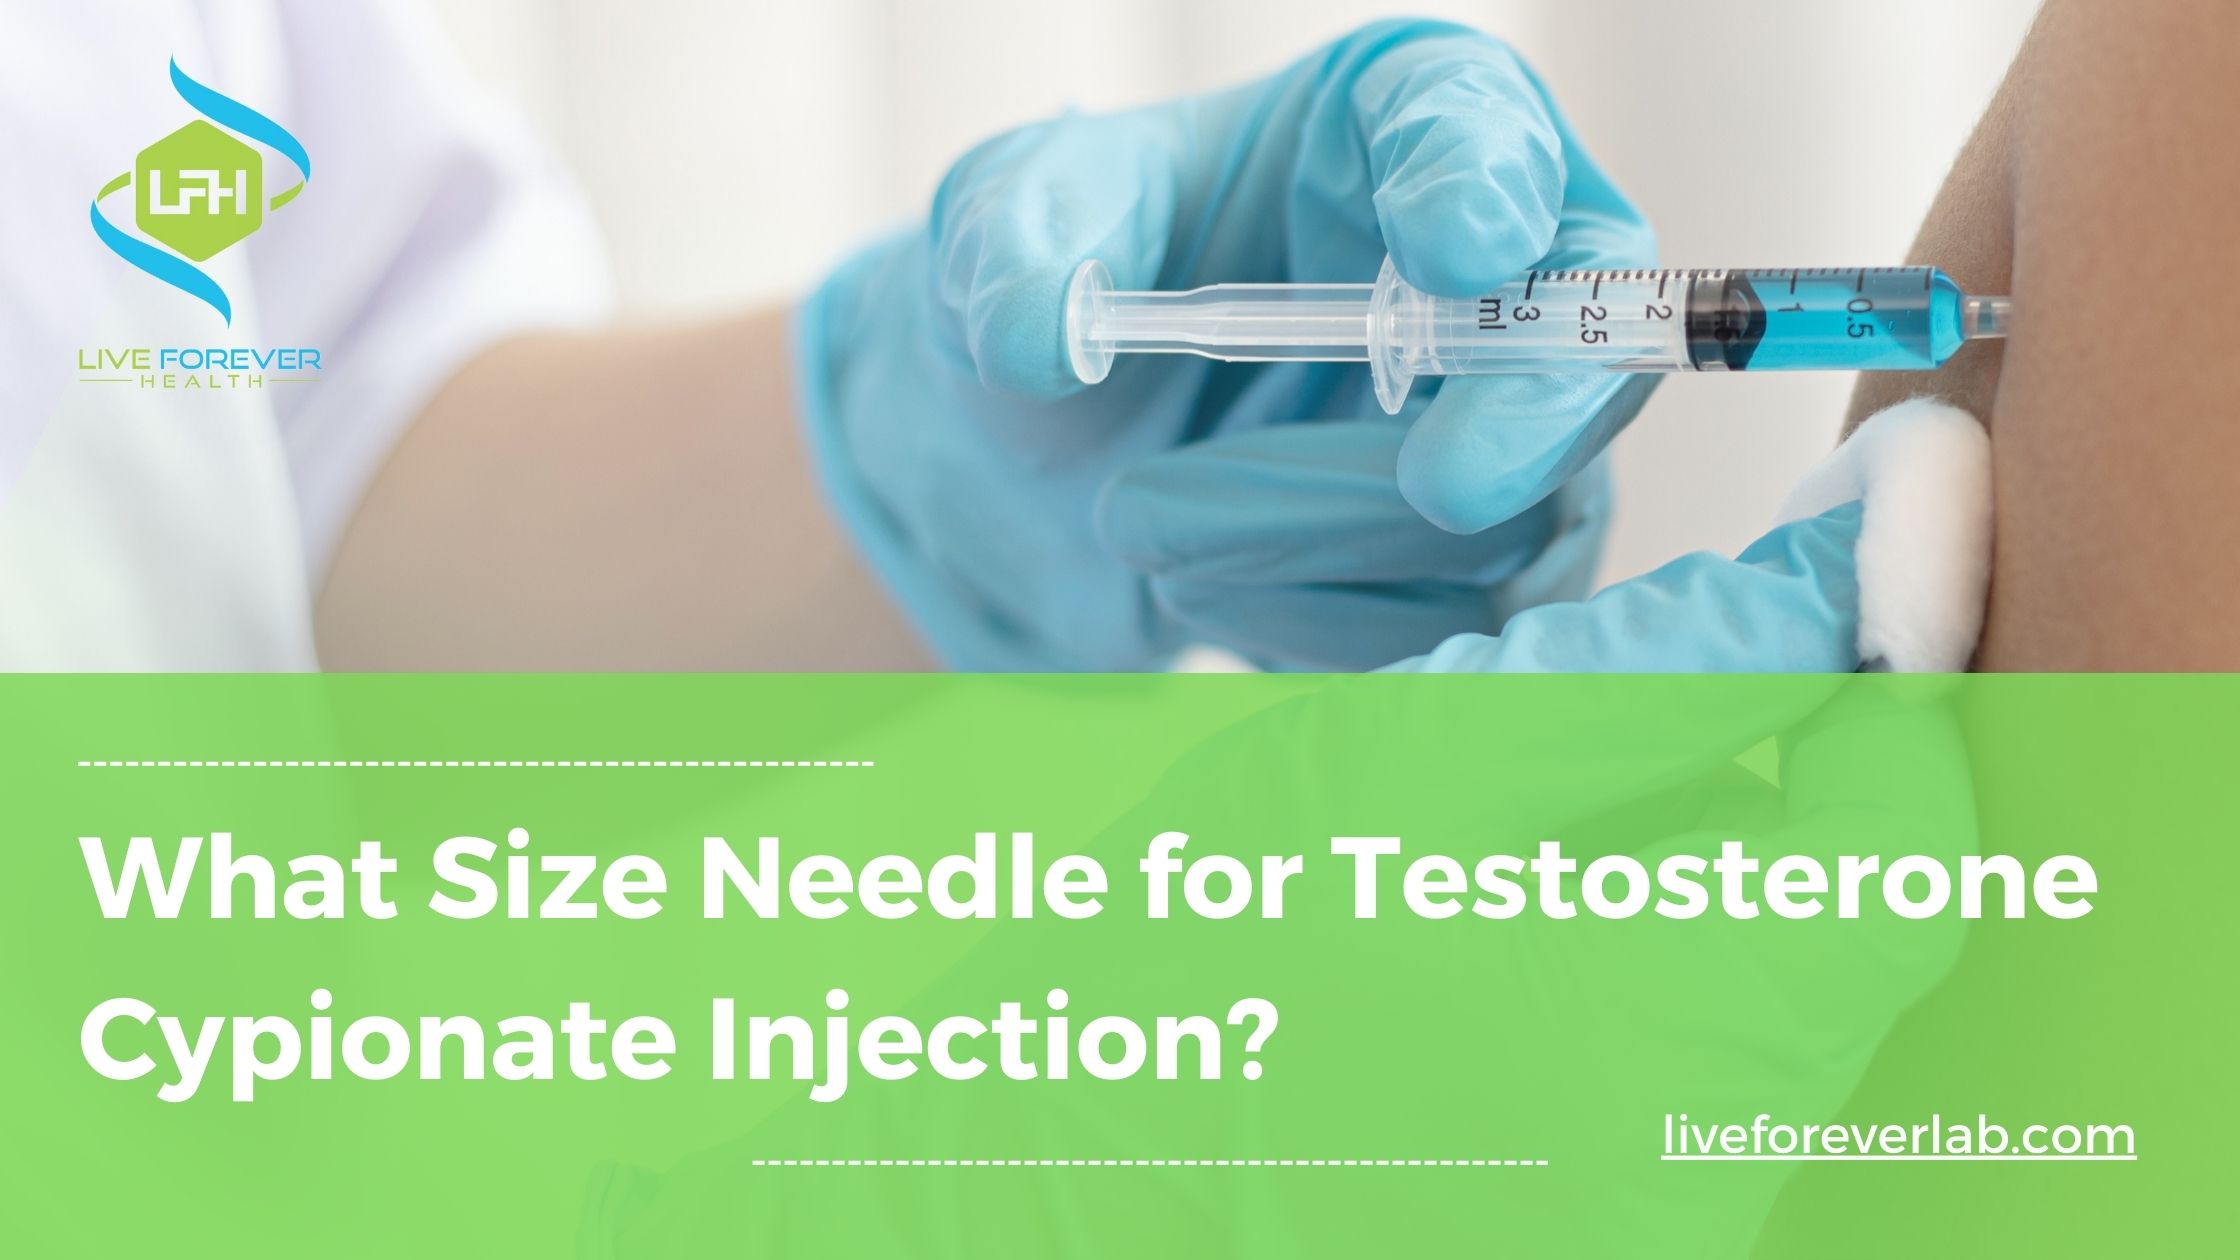 What Size Needle for Testosterone Cypionate Injection